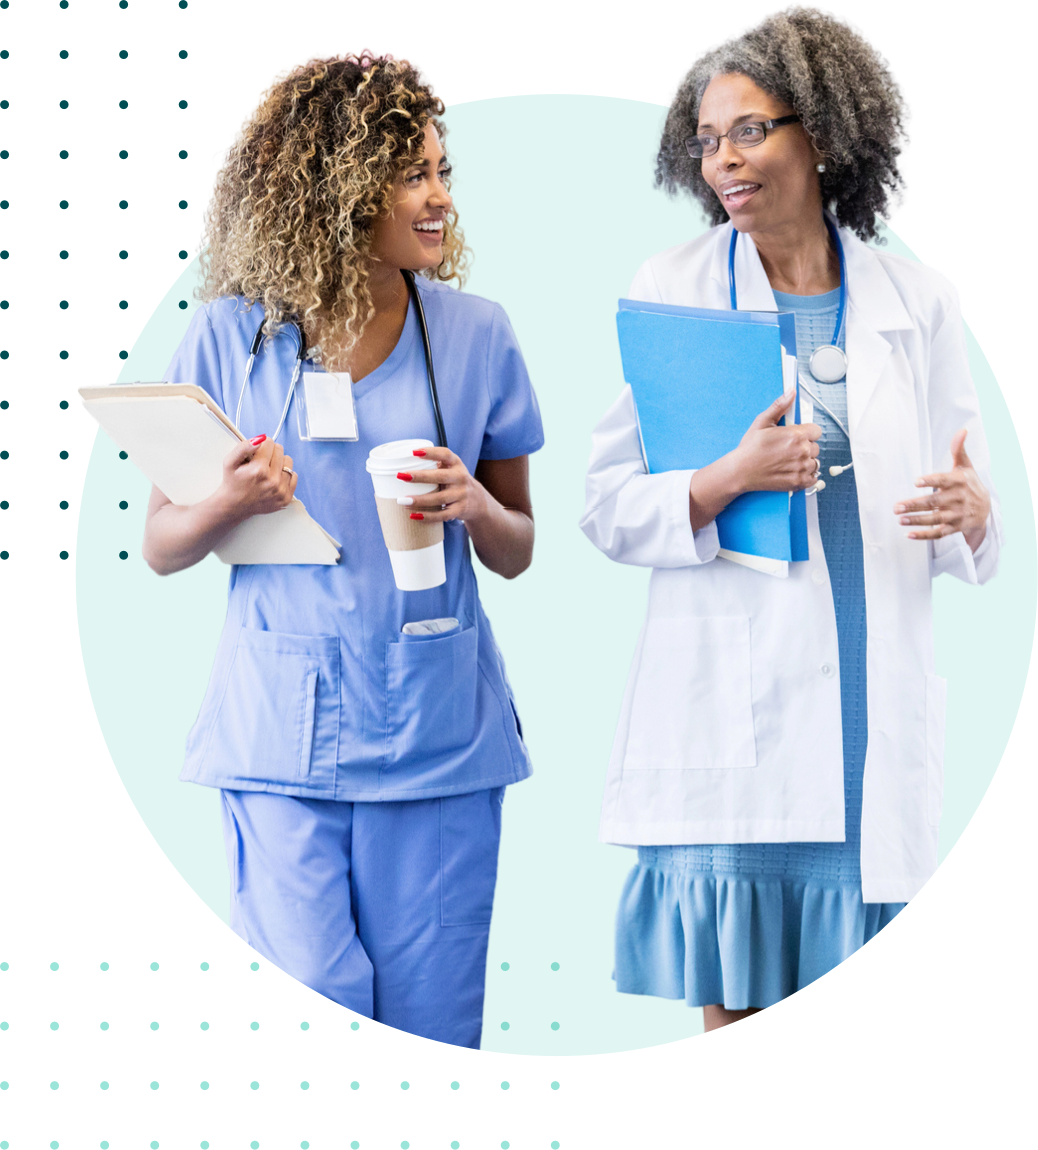 Two healthcare workers walking and talking